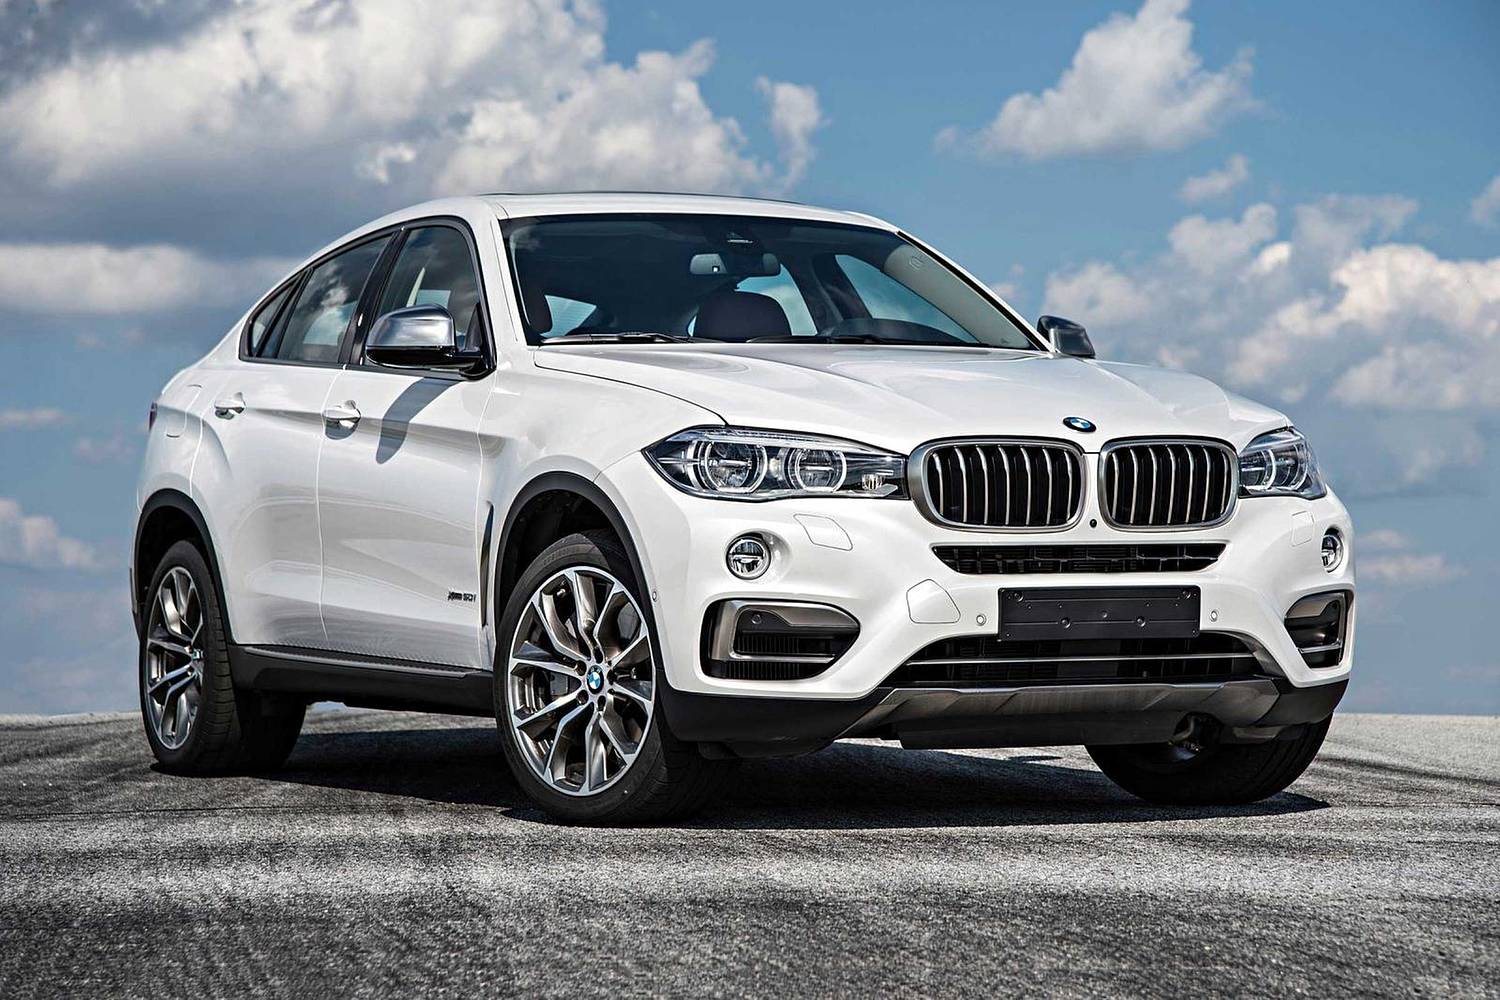 BMW X6 xDrive50i 4dr SUV Exterior Shown (2017 model year shown)